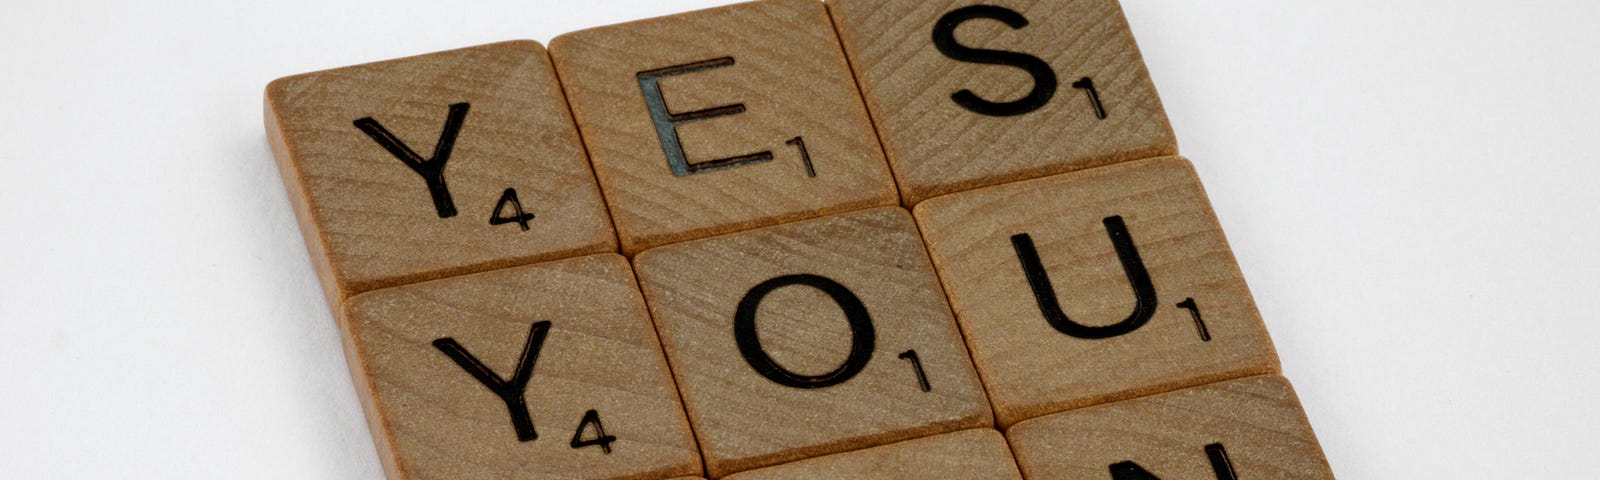 Letters from a Scrabble game, symbolizing skill with letters